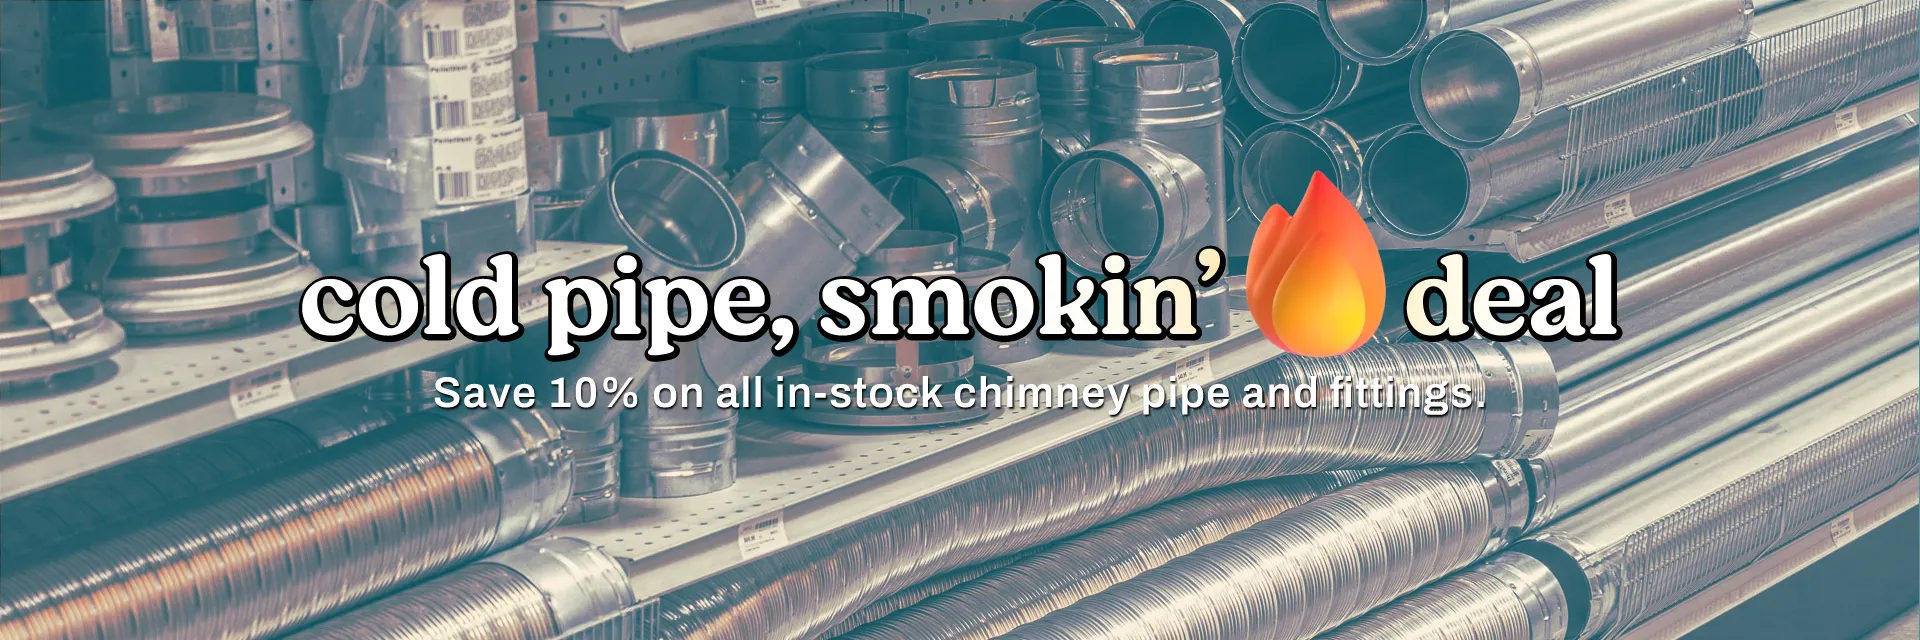 cold pipe & smokin’ 🔥 deal! 10% off all in-stock chimney pieces.